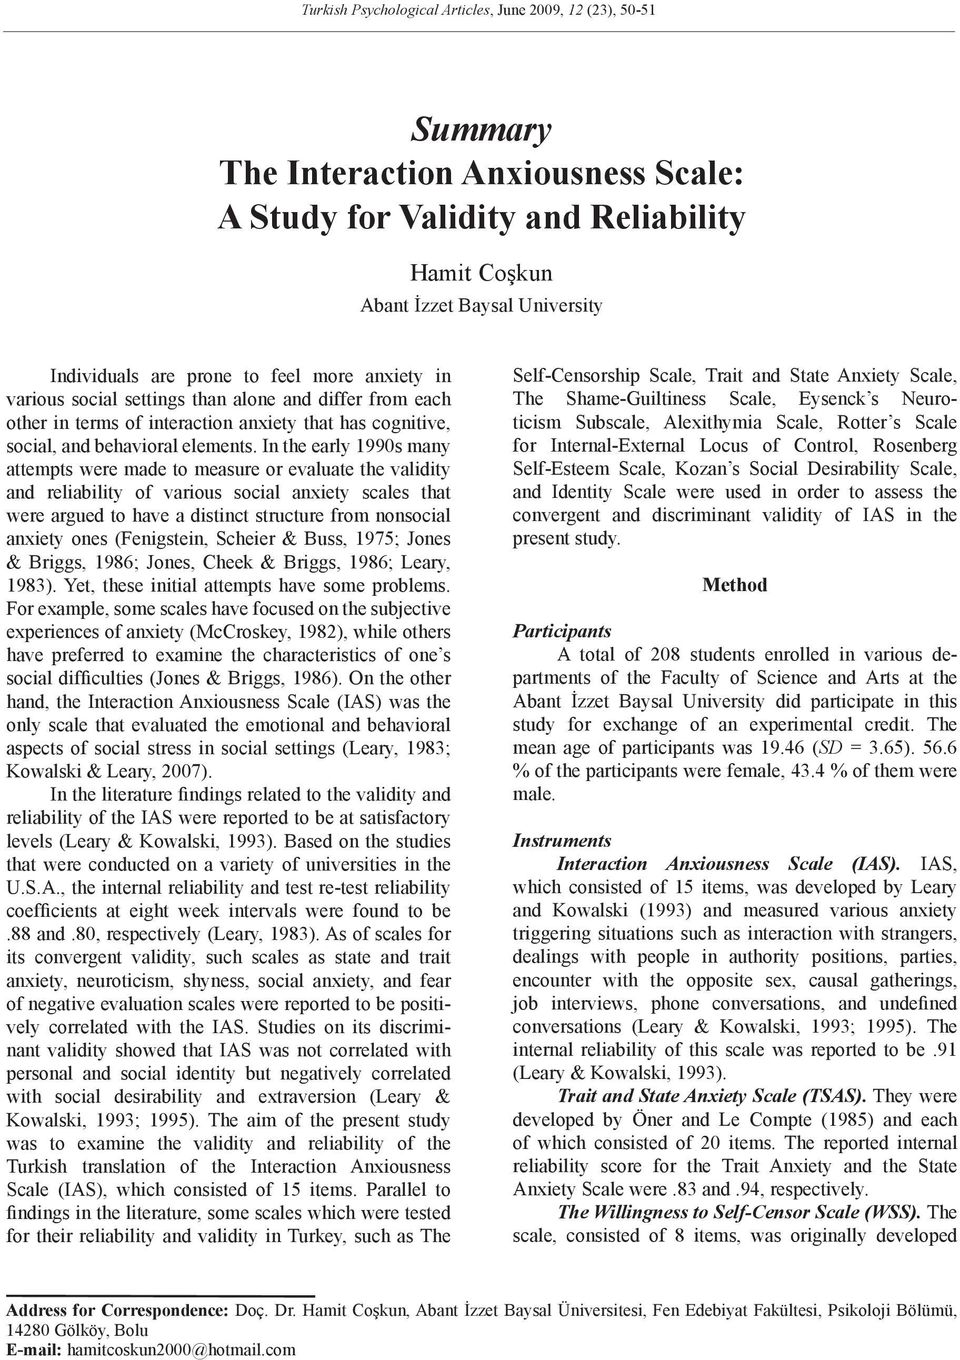 In the early 1990s many attempts were made to measure or evaluate the validity and reliability of various social anxiety scales that were argued to have a distinct structure from nonsocial anxiety